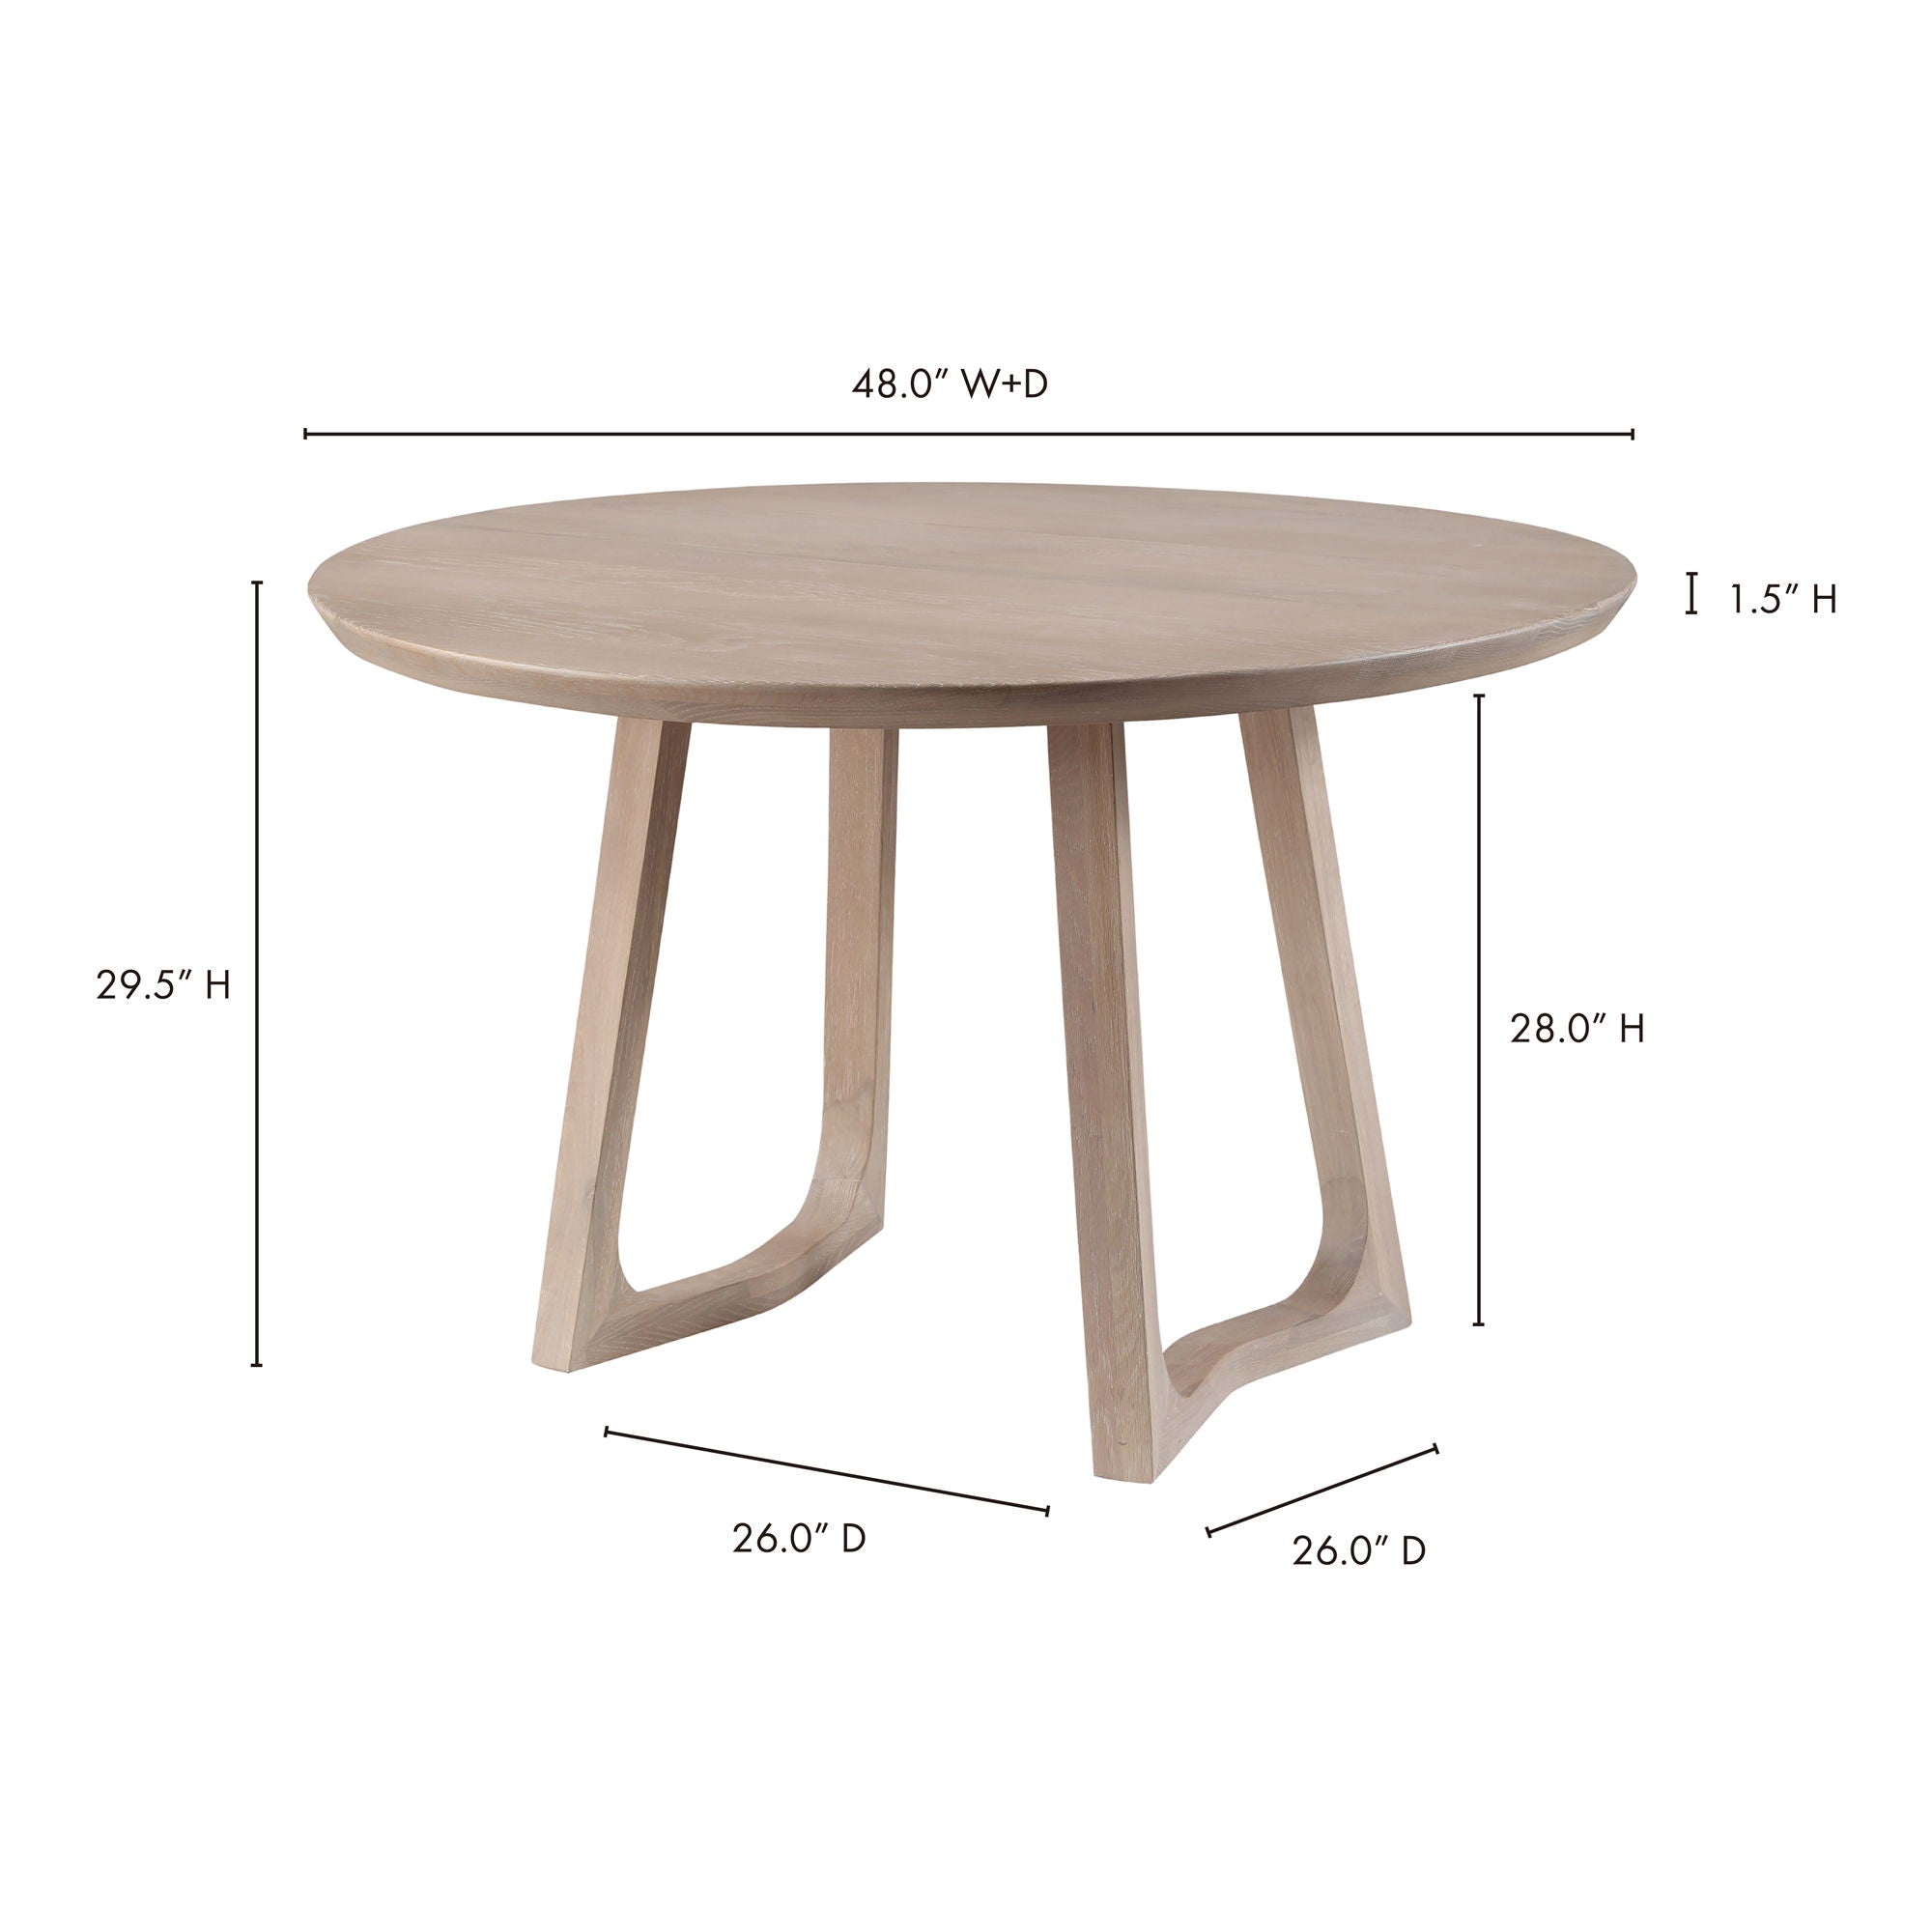 Silas - Round Dining Table - White Wash